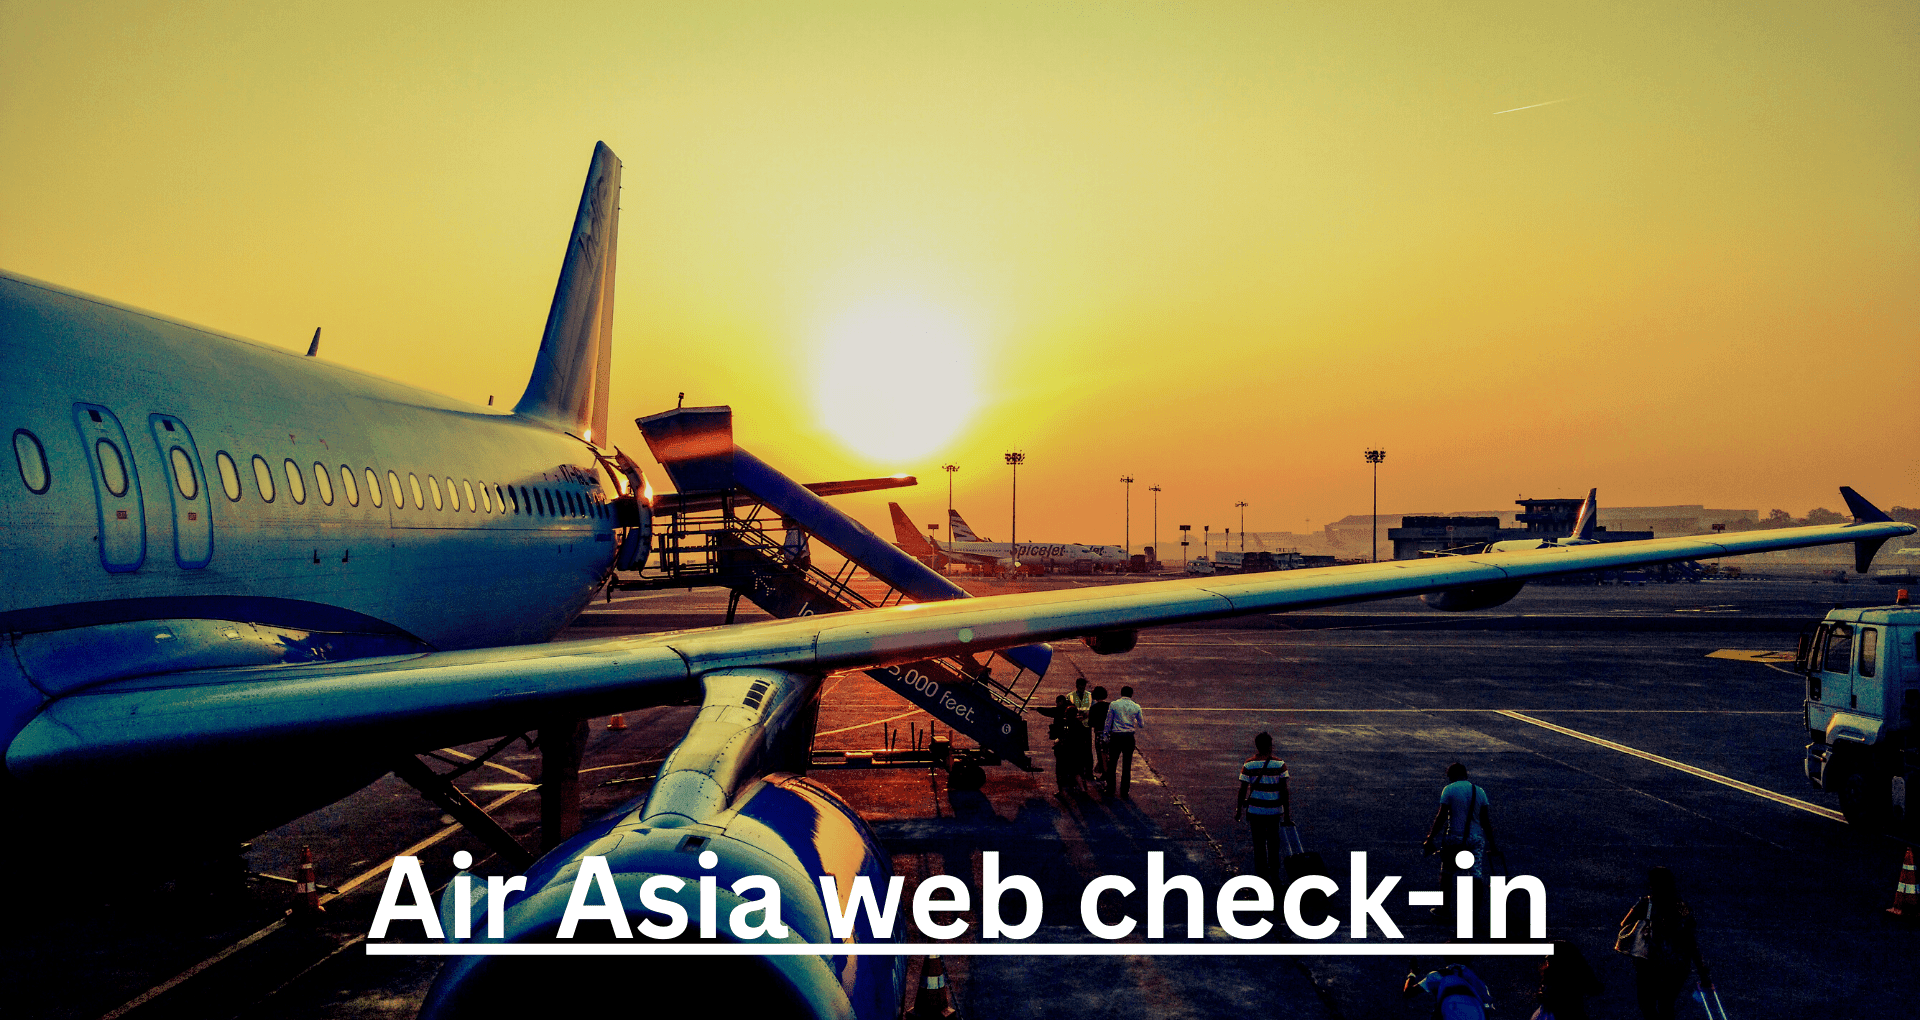 Air Asia web check-in